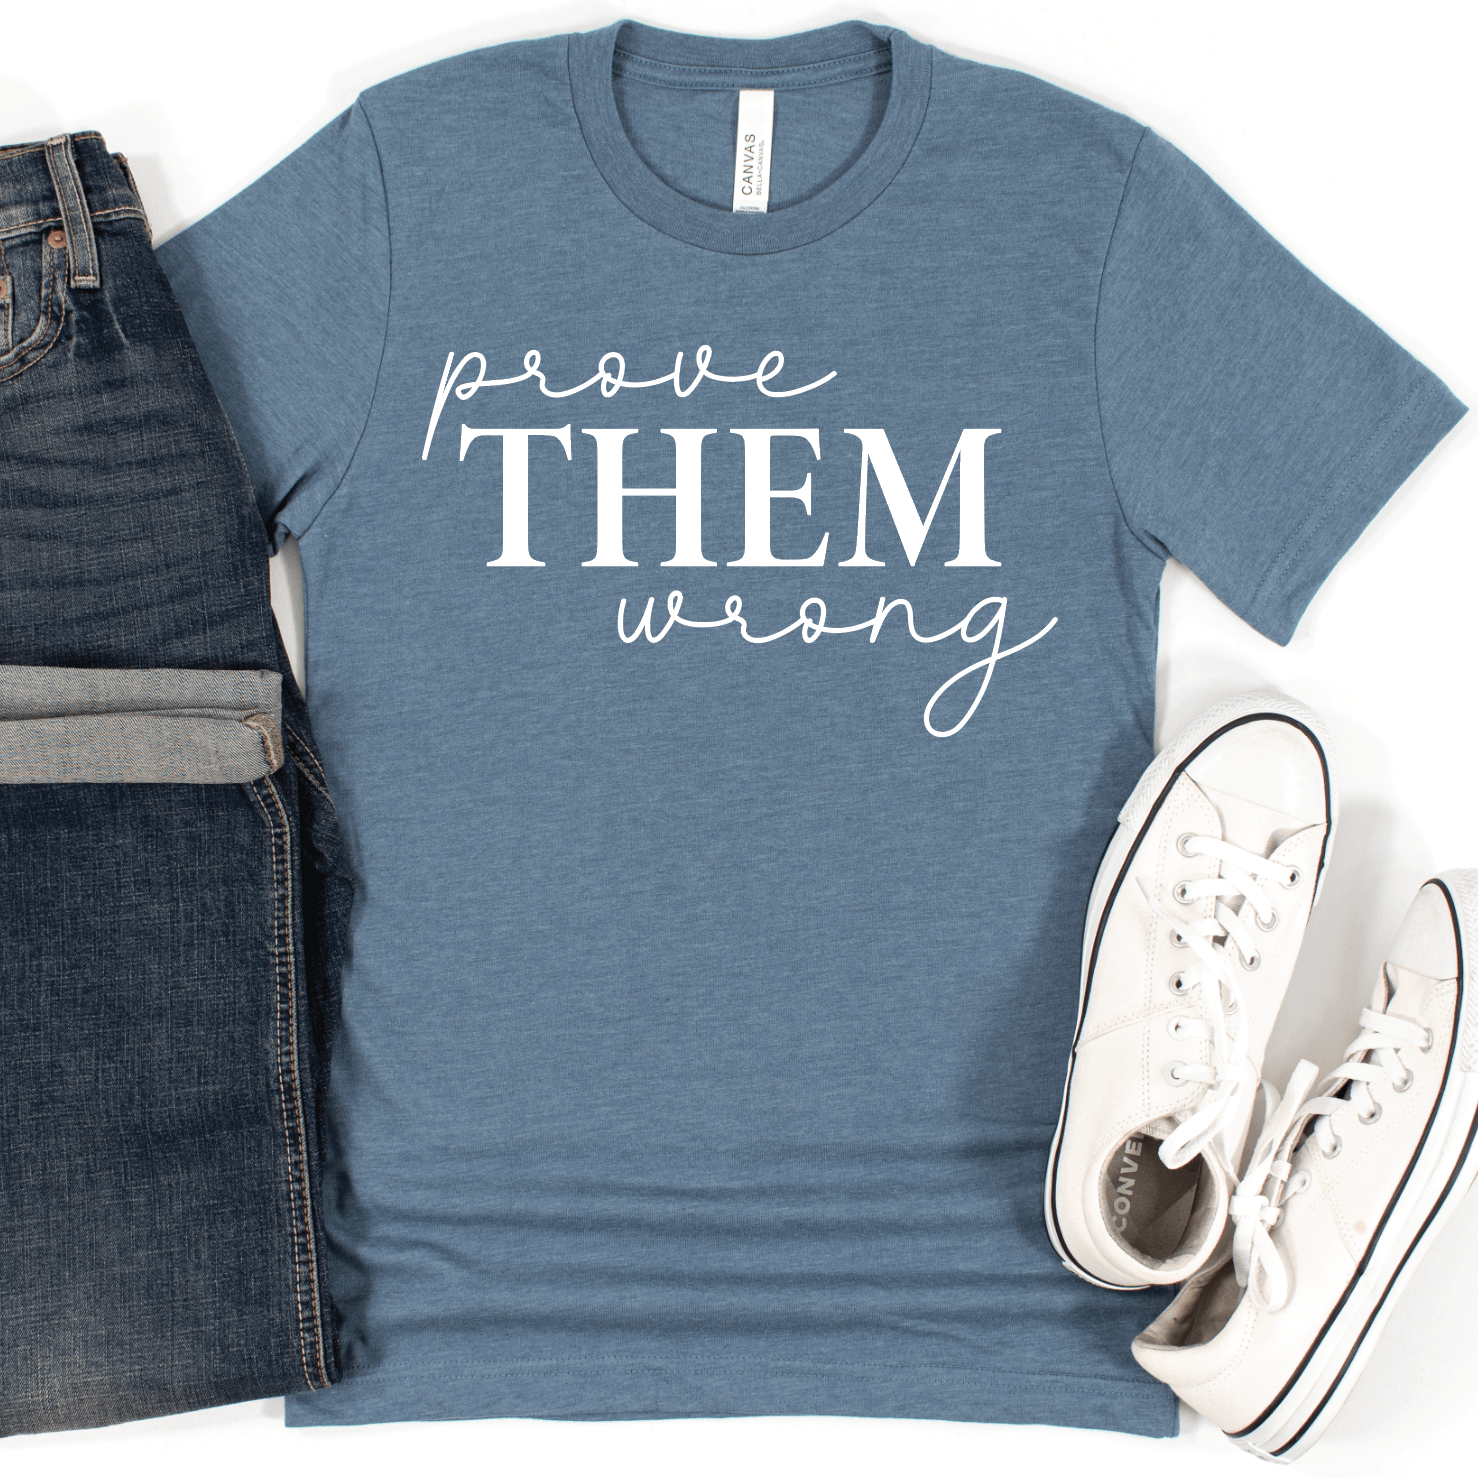 PROVE THEM WRONG - Signastyle Boutique